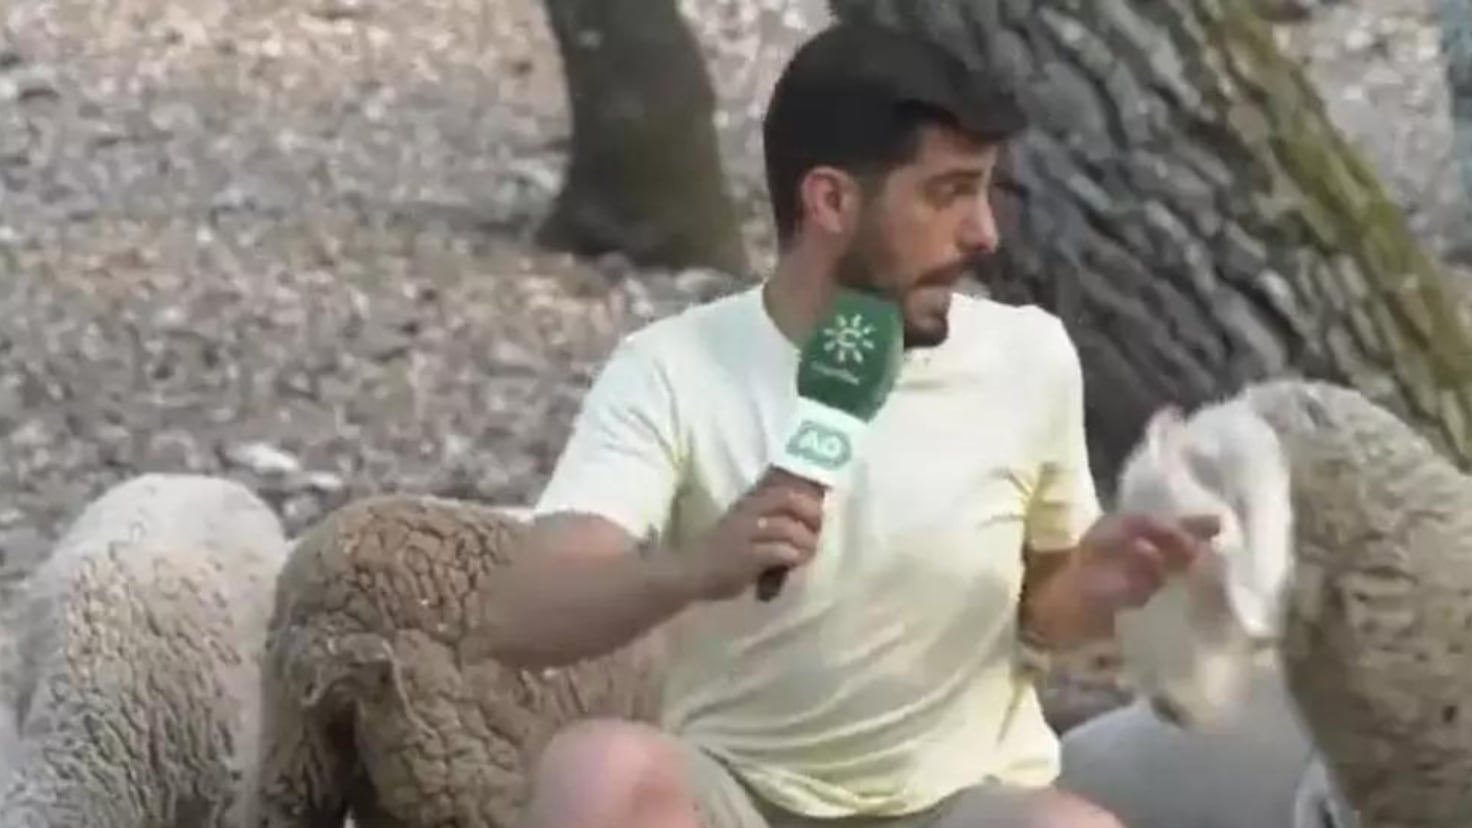 A reporter from Canal Sur, attacked by a sheep live